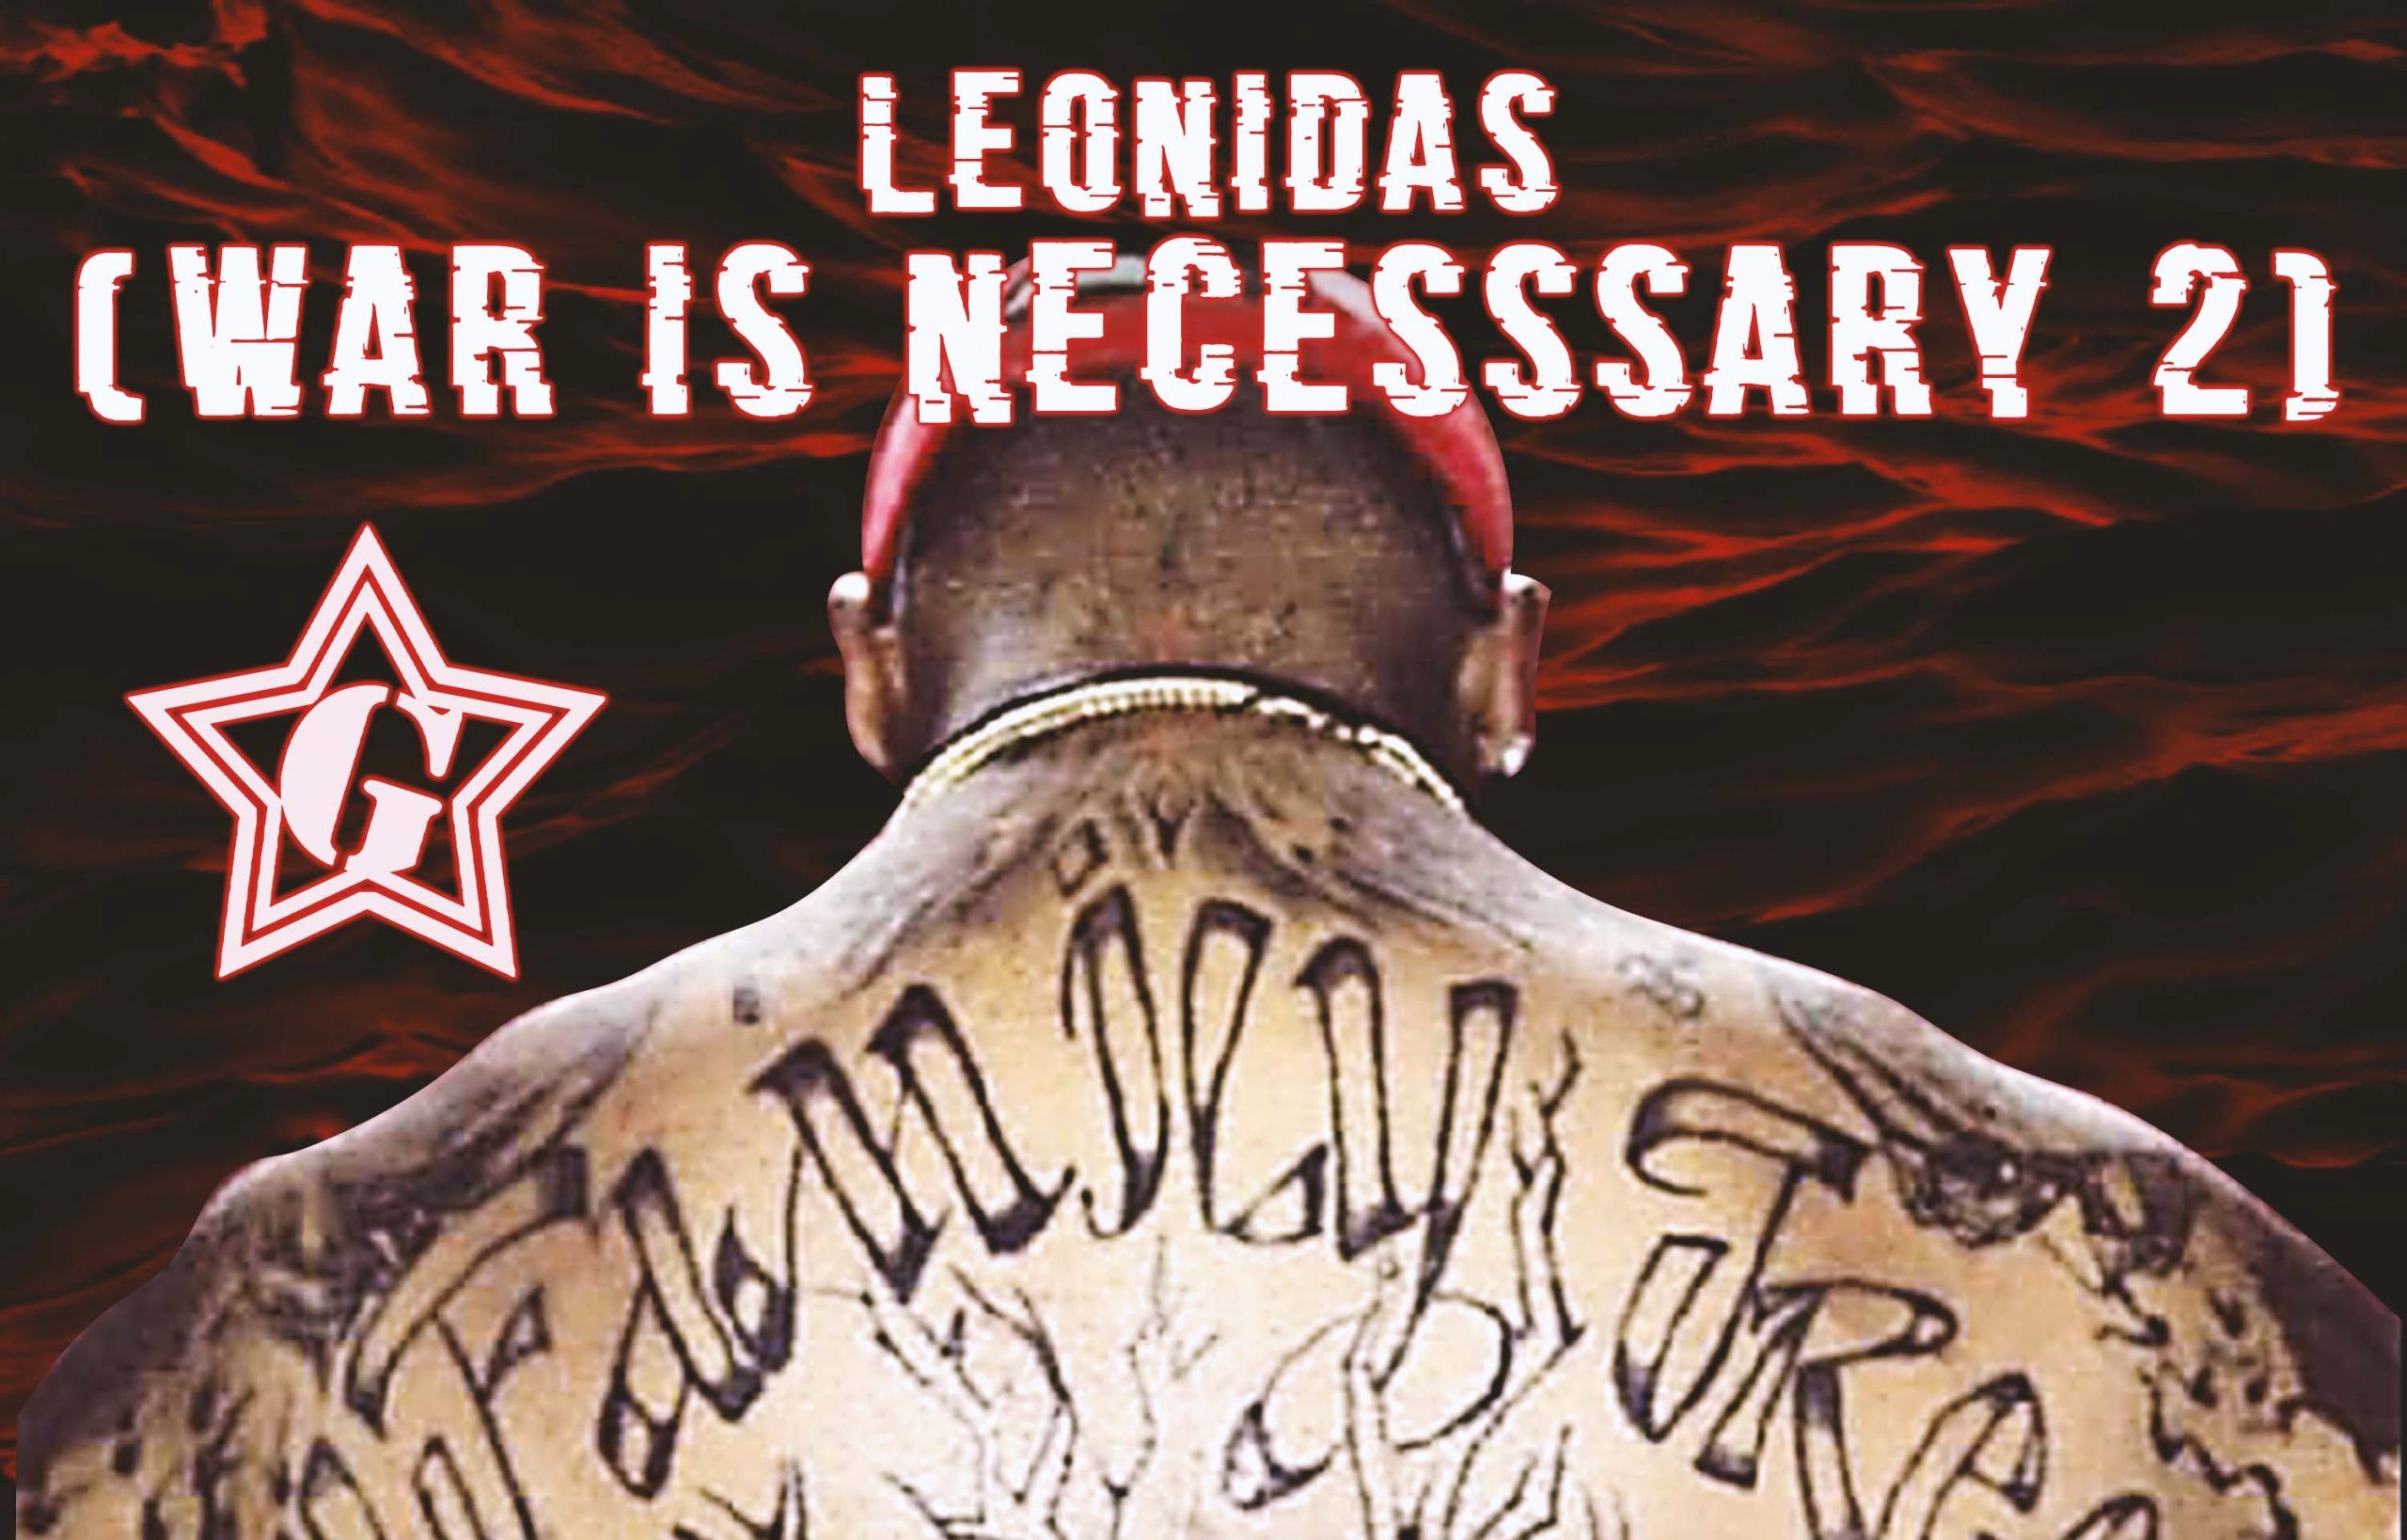 Gritty Boi Gives Us His "Leonidas (War Is Necessary 2)" Album